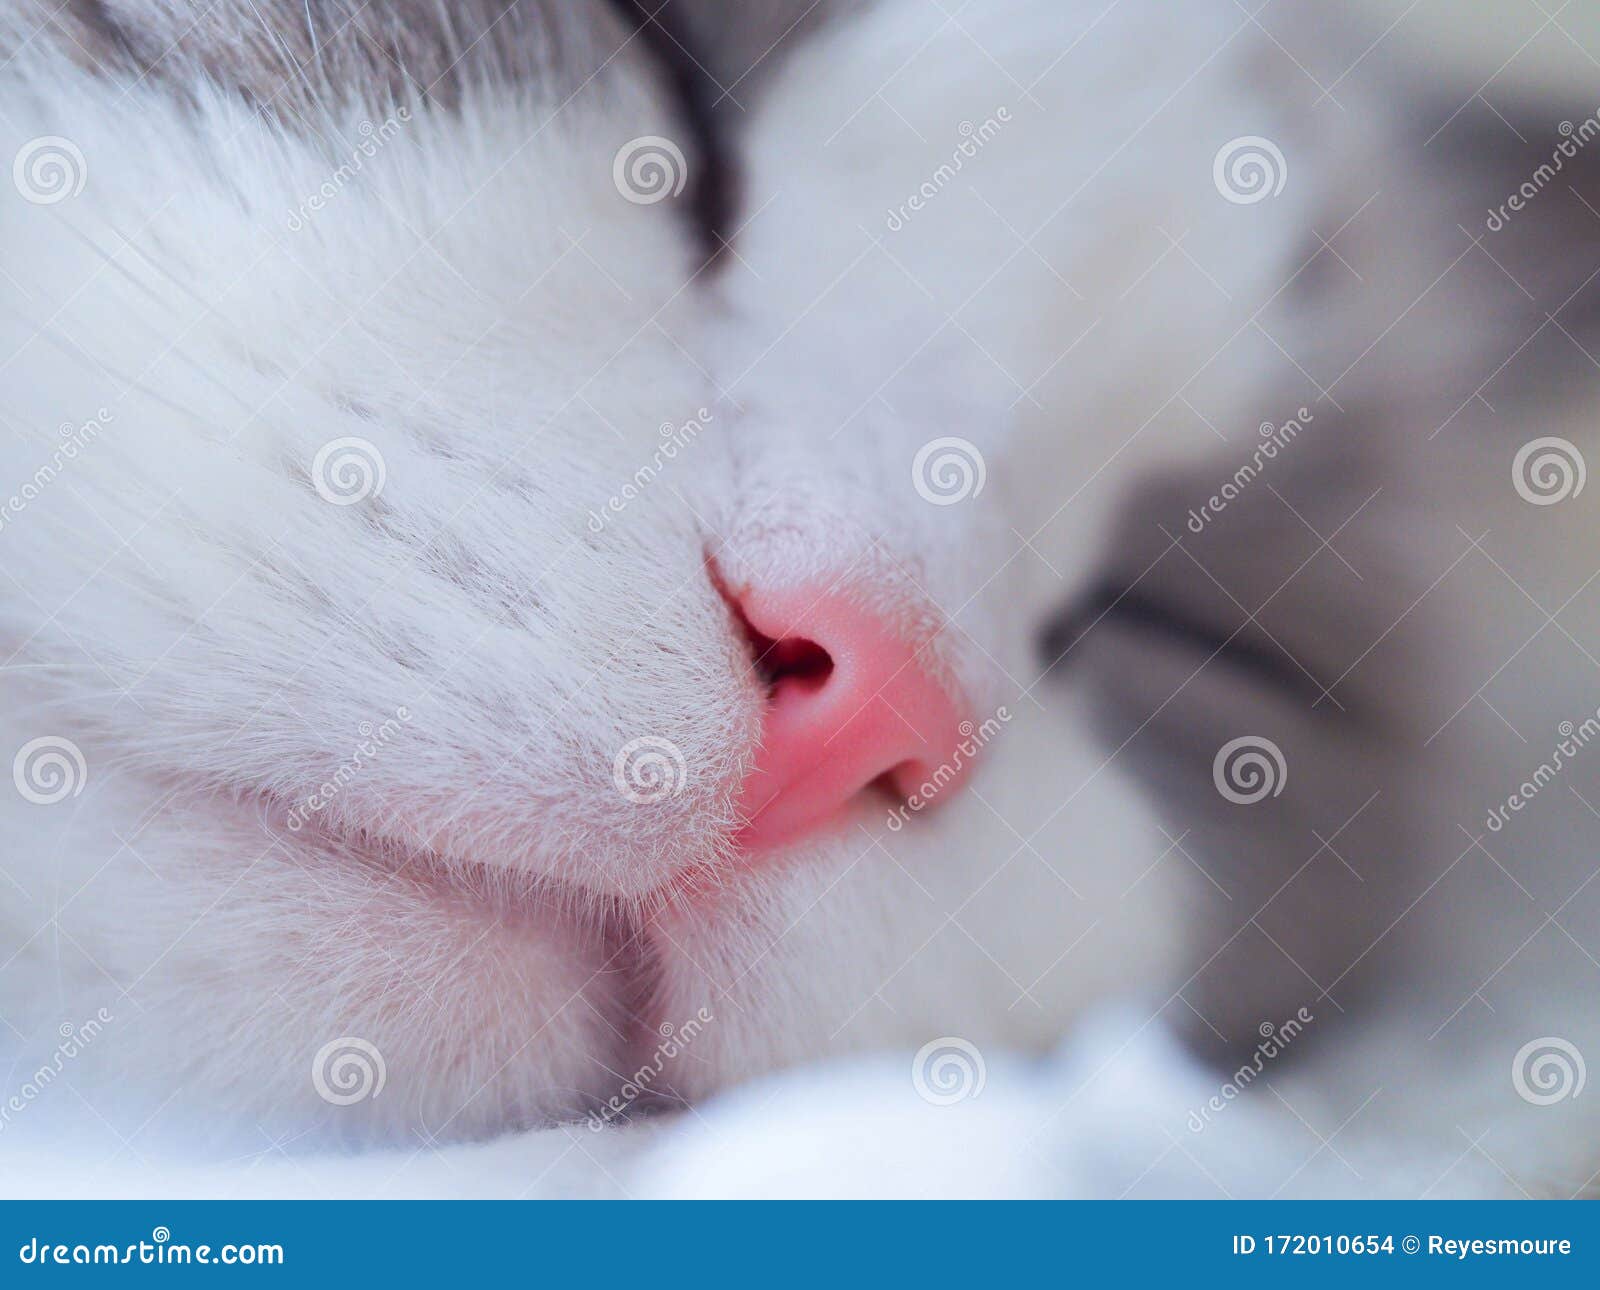 sleepy cat with pink nose.